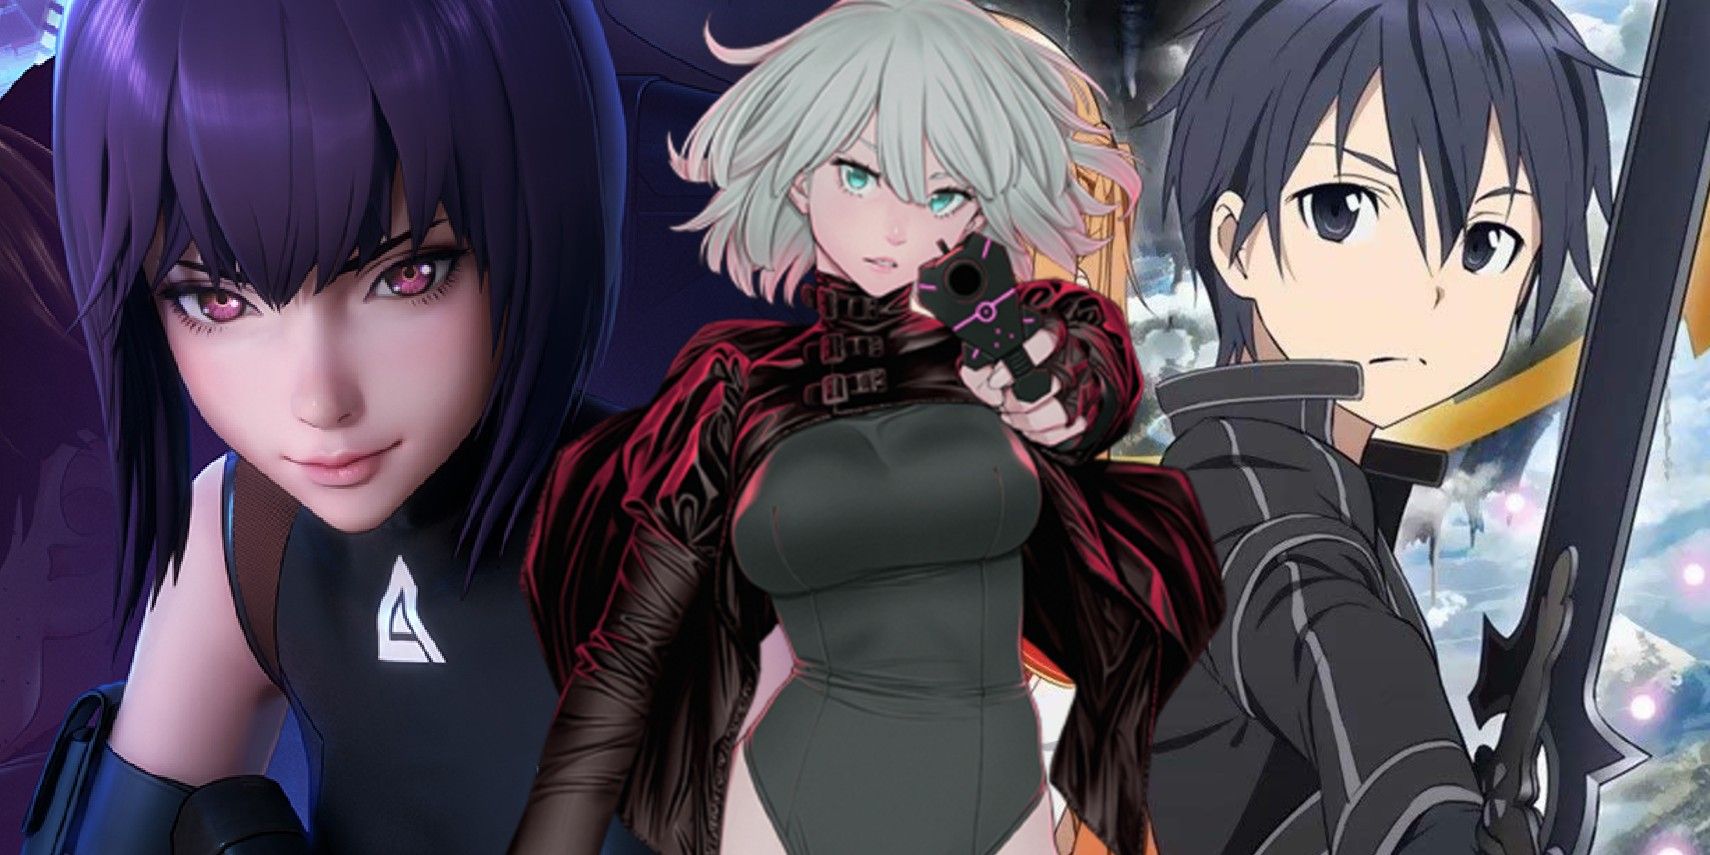 Tokyo Revengers Review: A Reason To Fall In Love With Sci-fi Anime Again